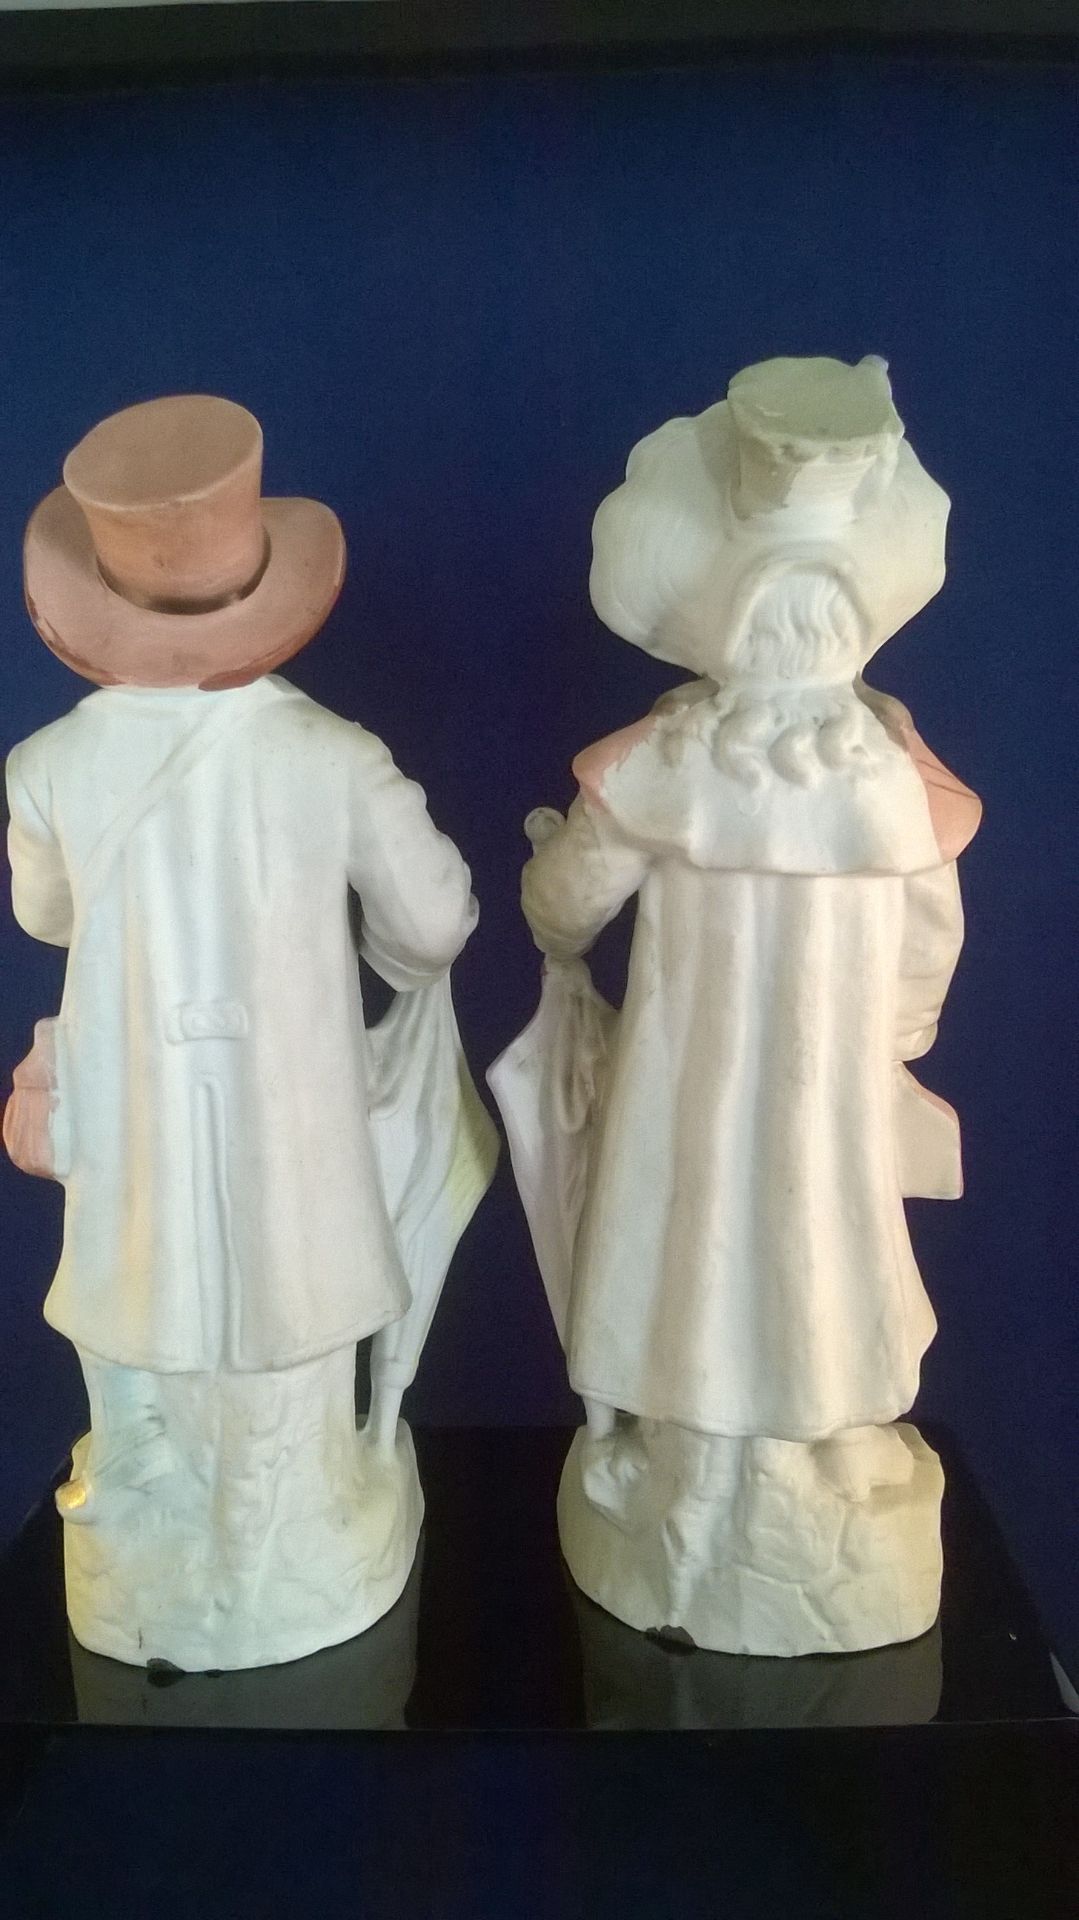 PAIR OF DELILGHTFUL LARGE BISQUE CHINA FAIRINGS "I AM OFF FOR A LONG JOURNEY" and "I AM OFF WITH - Image 2 of 3